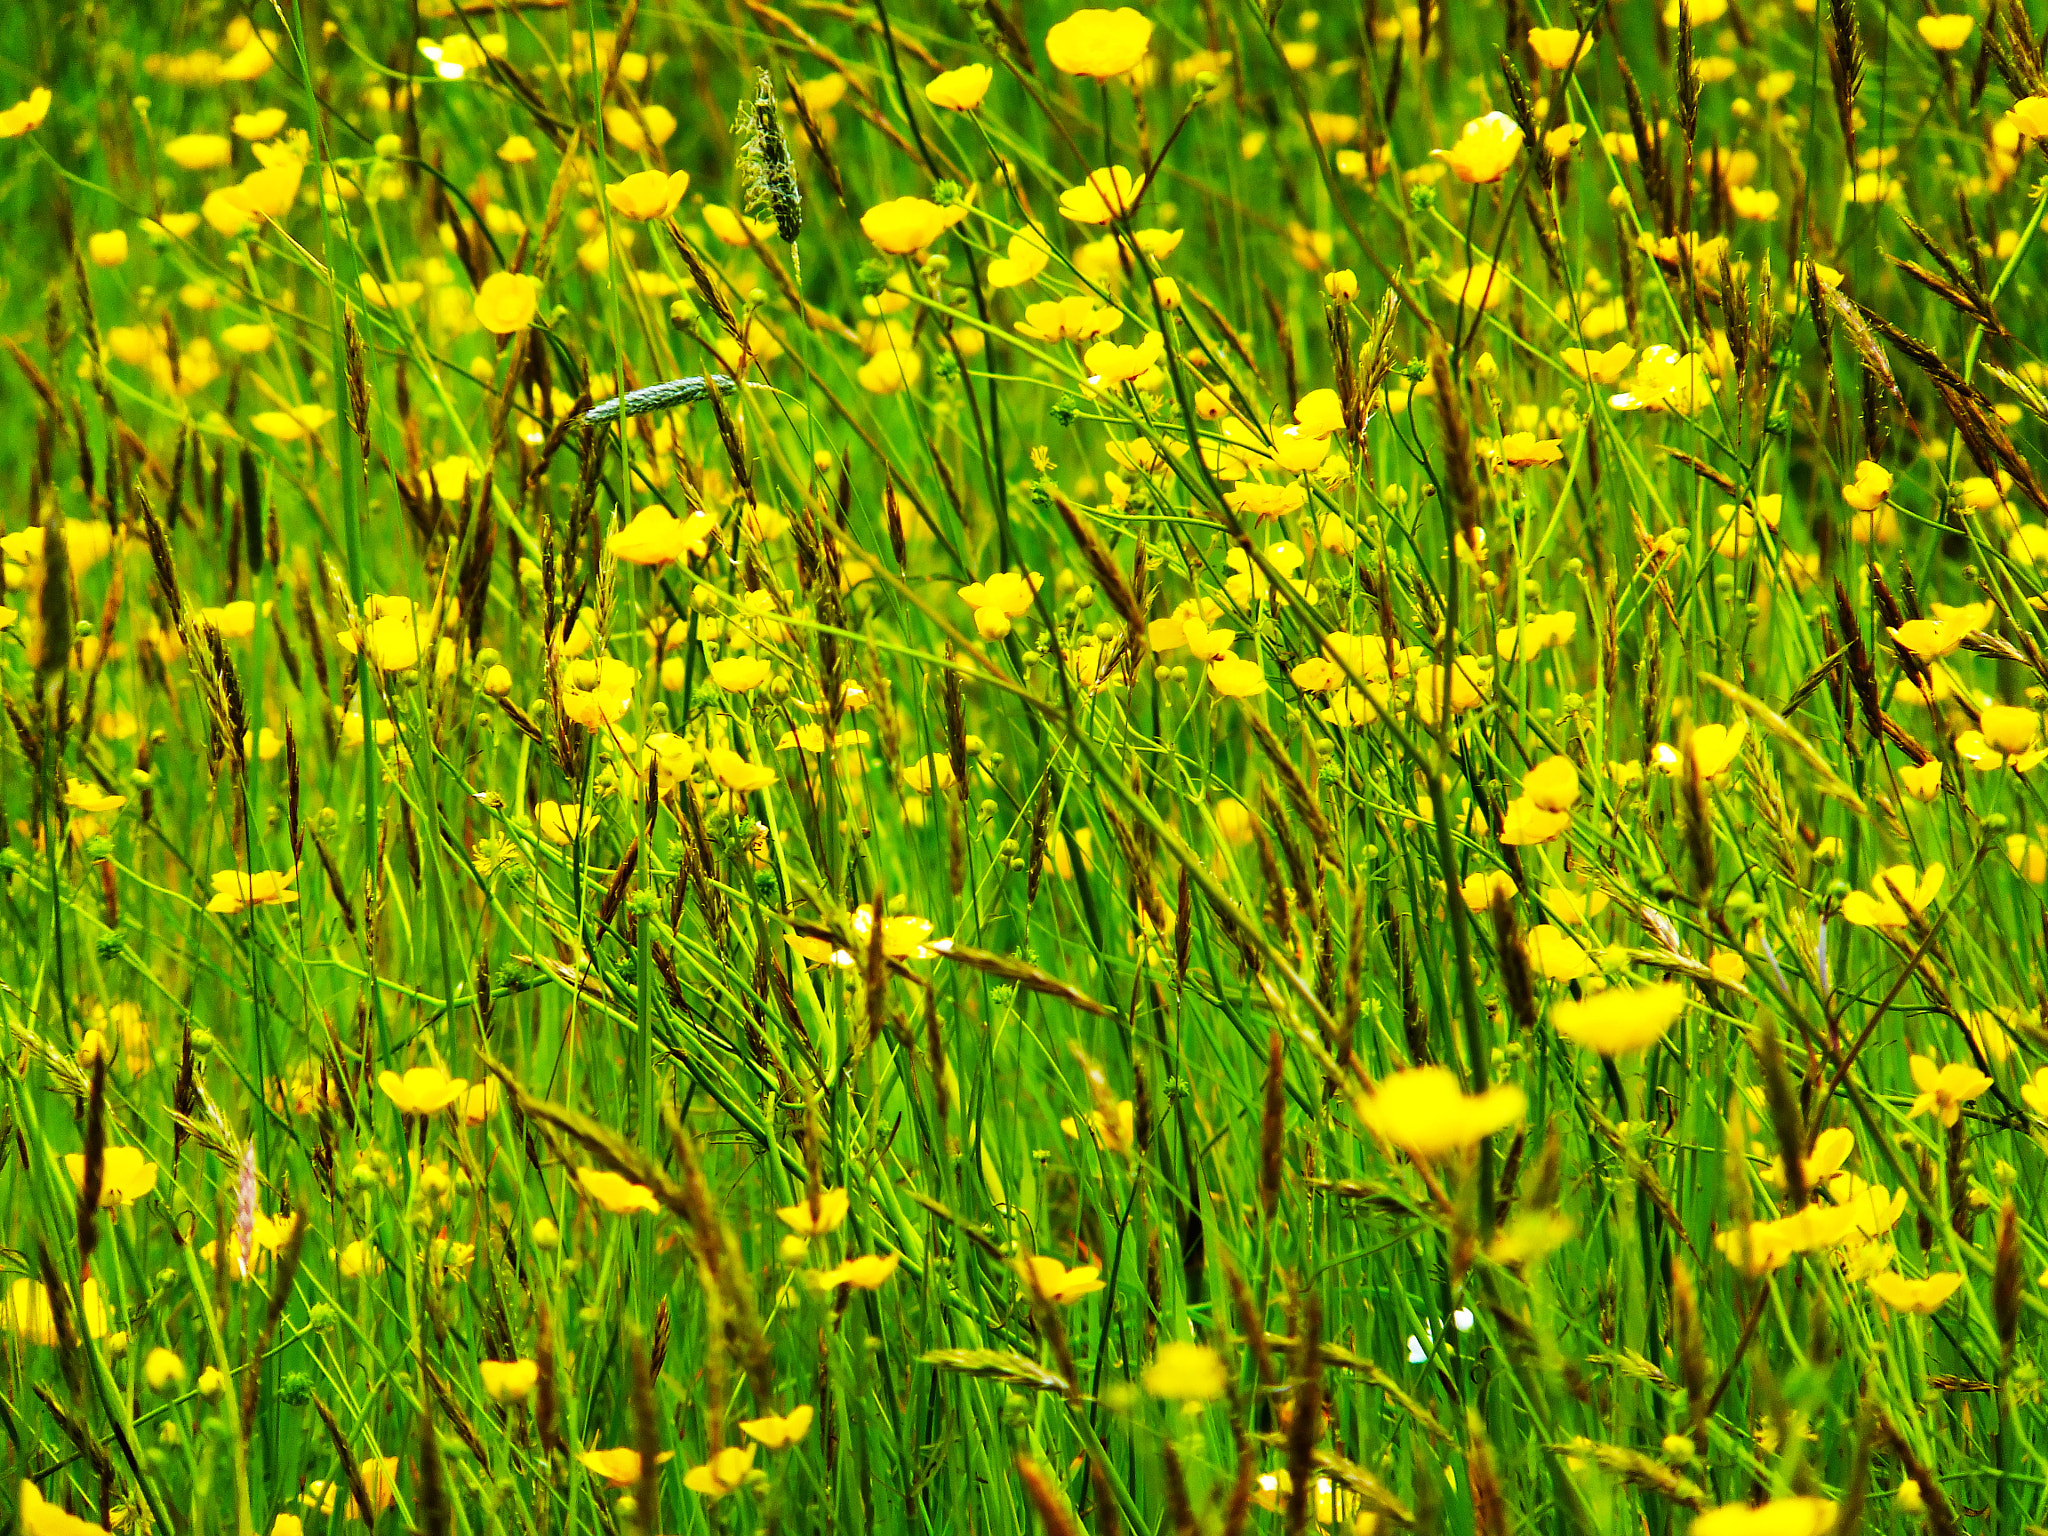 Fujifilm FinePix F600 EXR sample photo. Buttercups in an english field photography